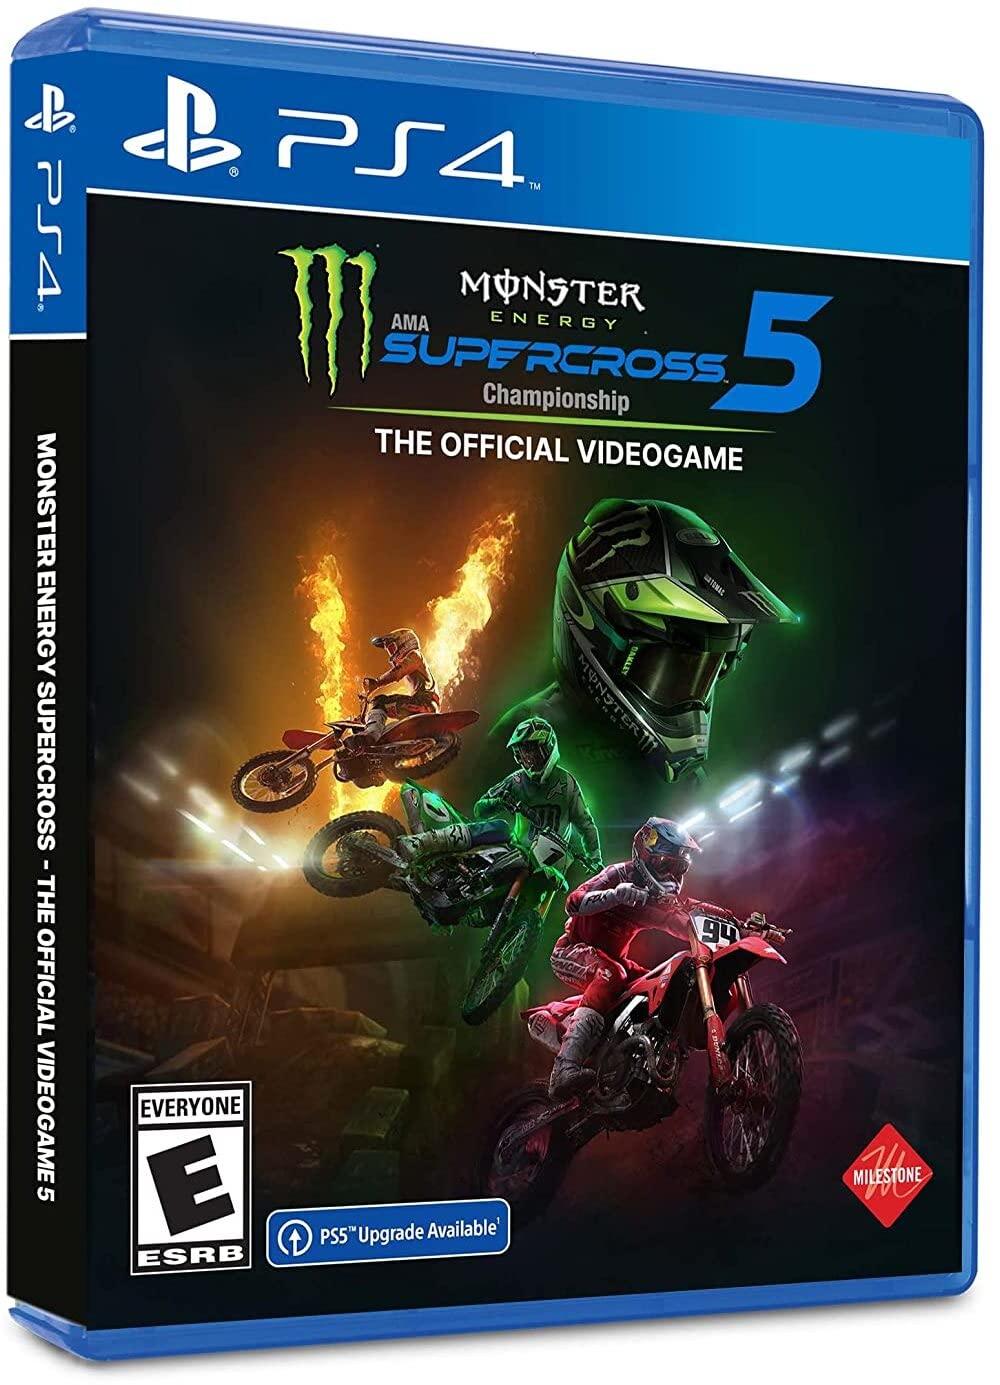 Monster Energy Supercross 5 - Sony PlayStation 4 (PS4)